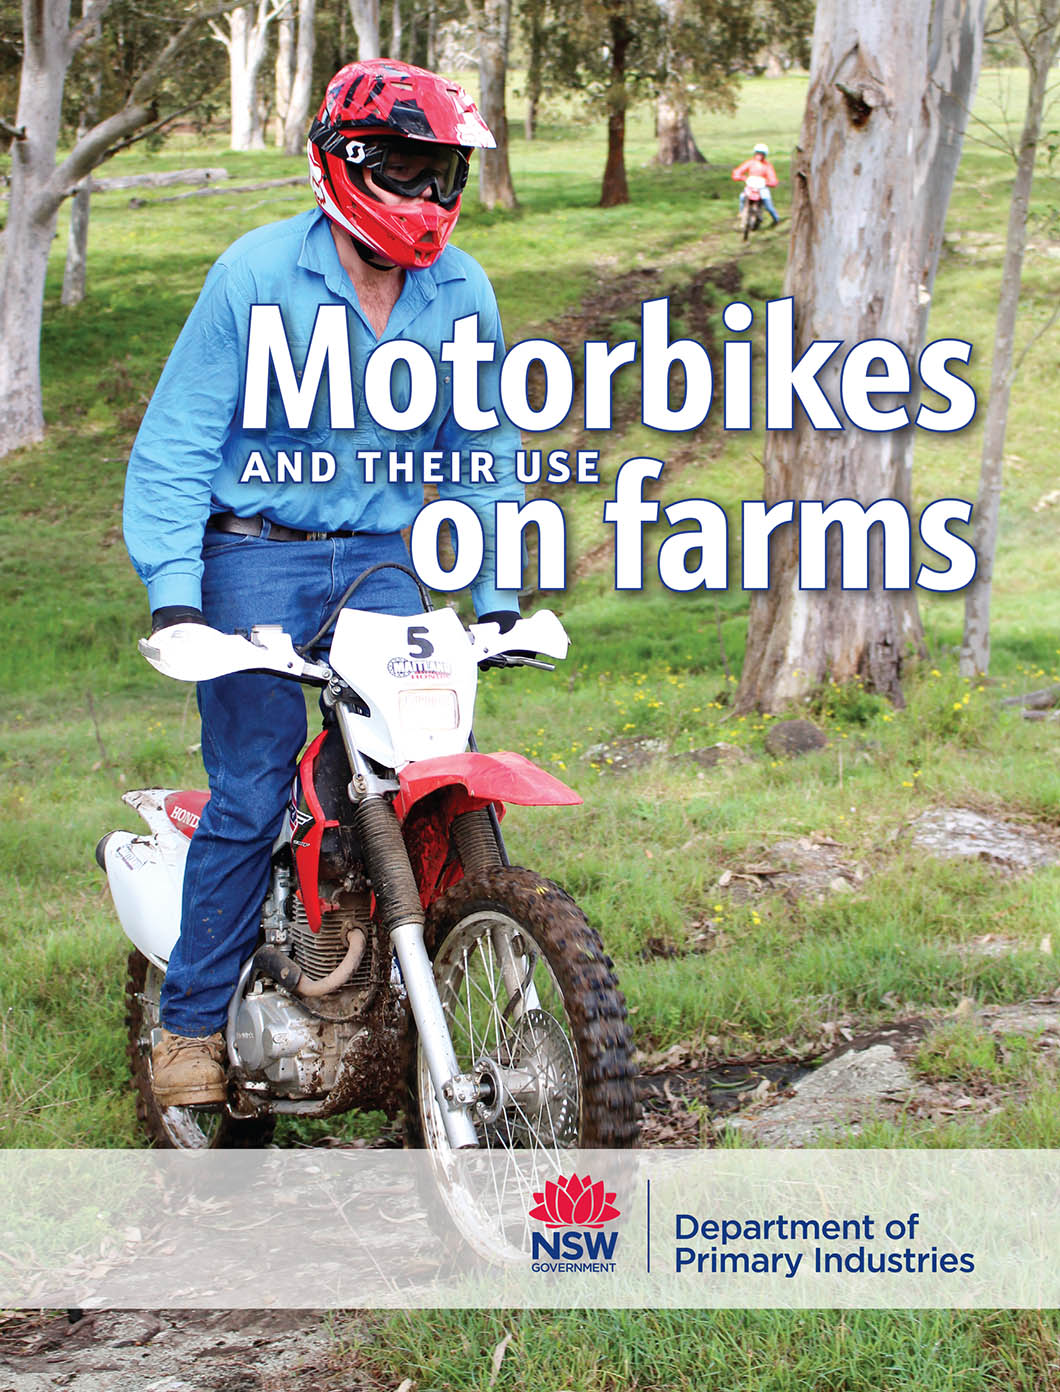 Motorbikes and their use on farms